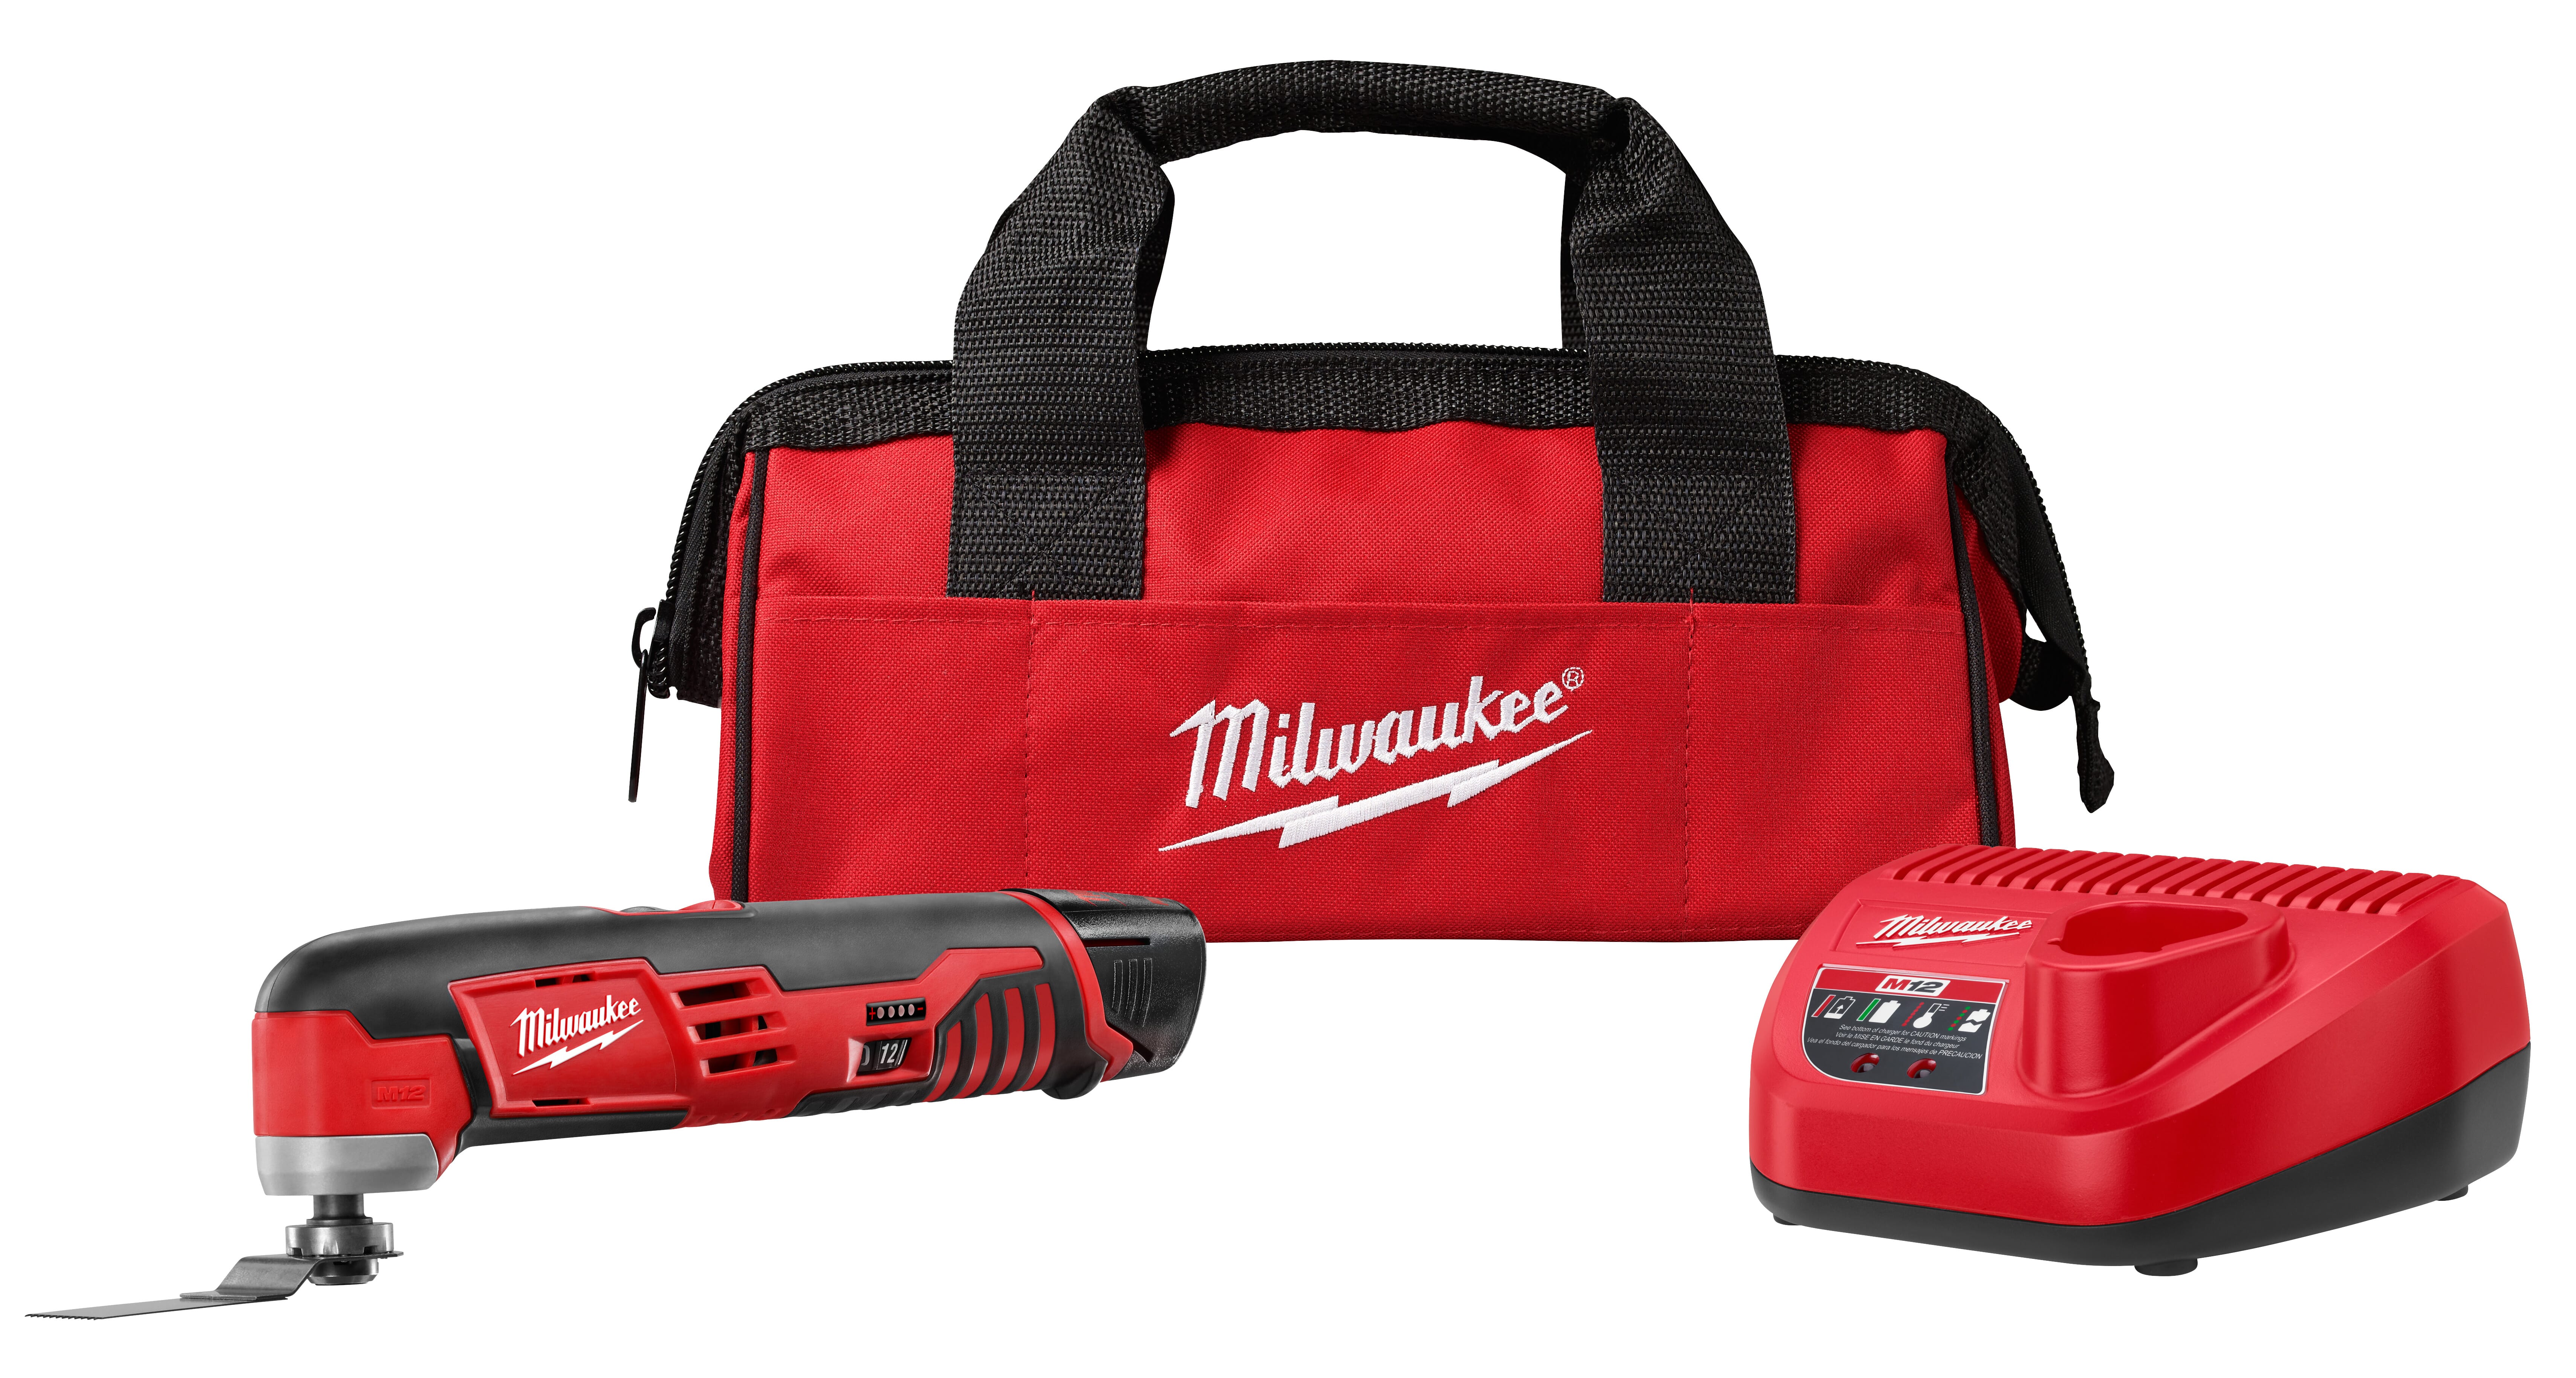 Milwaukee® M12™ 2426-21 Cordless Oscillating Multi-Tool Kit, 5000 to 20000 opm Speed, 12 VDC, Lithium-Ion Battery, 1 Battery